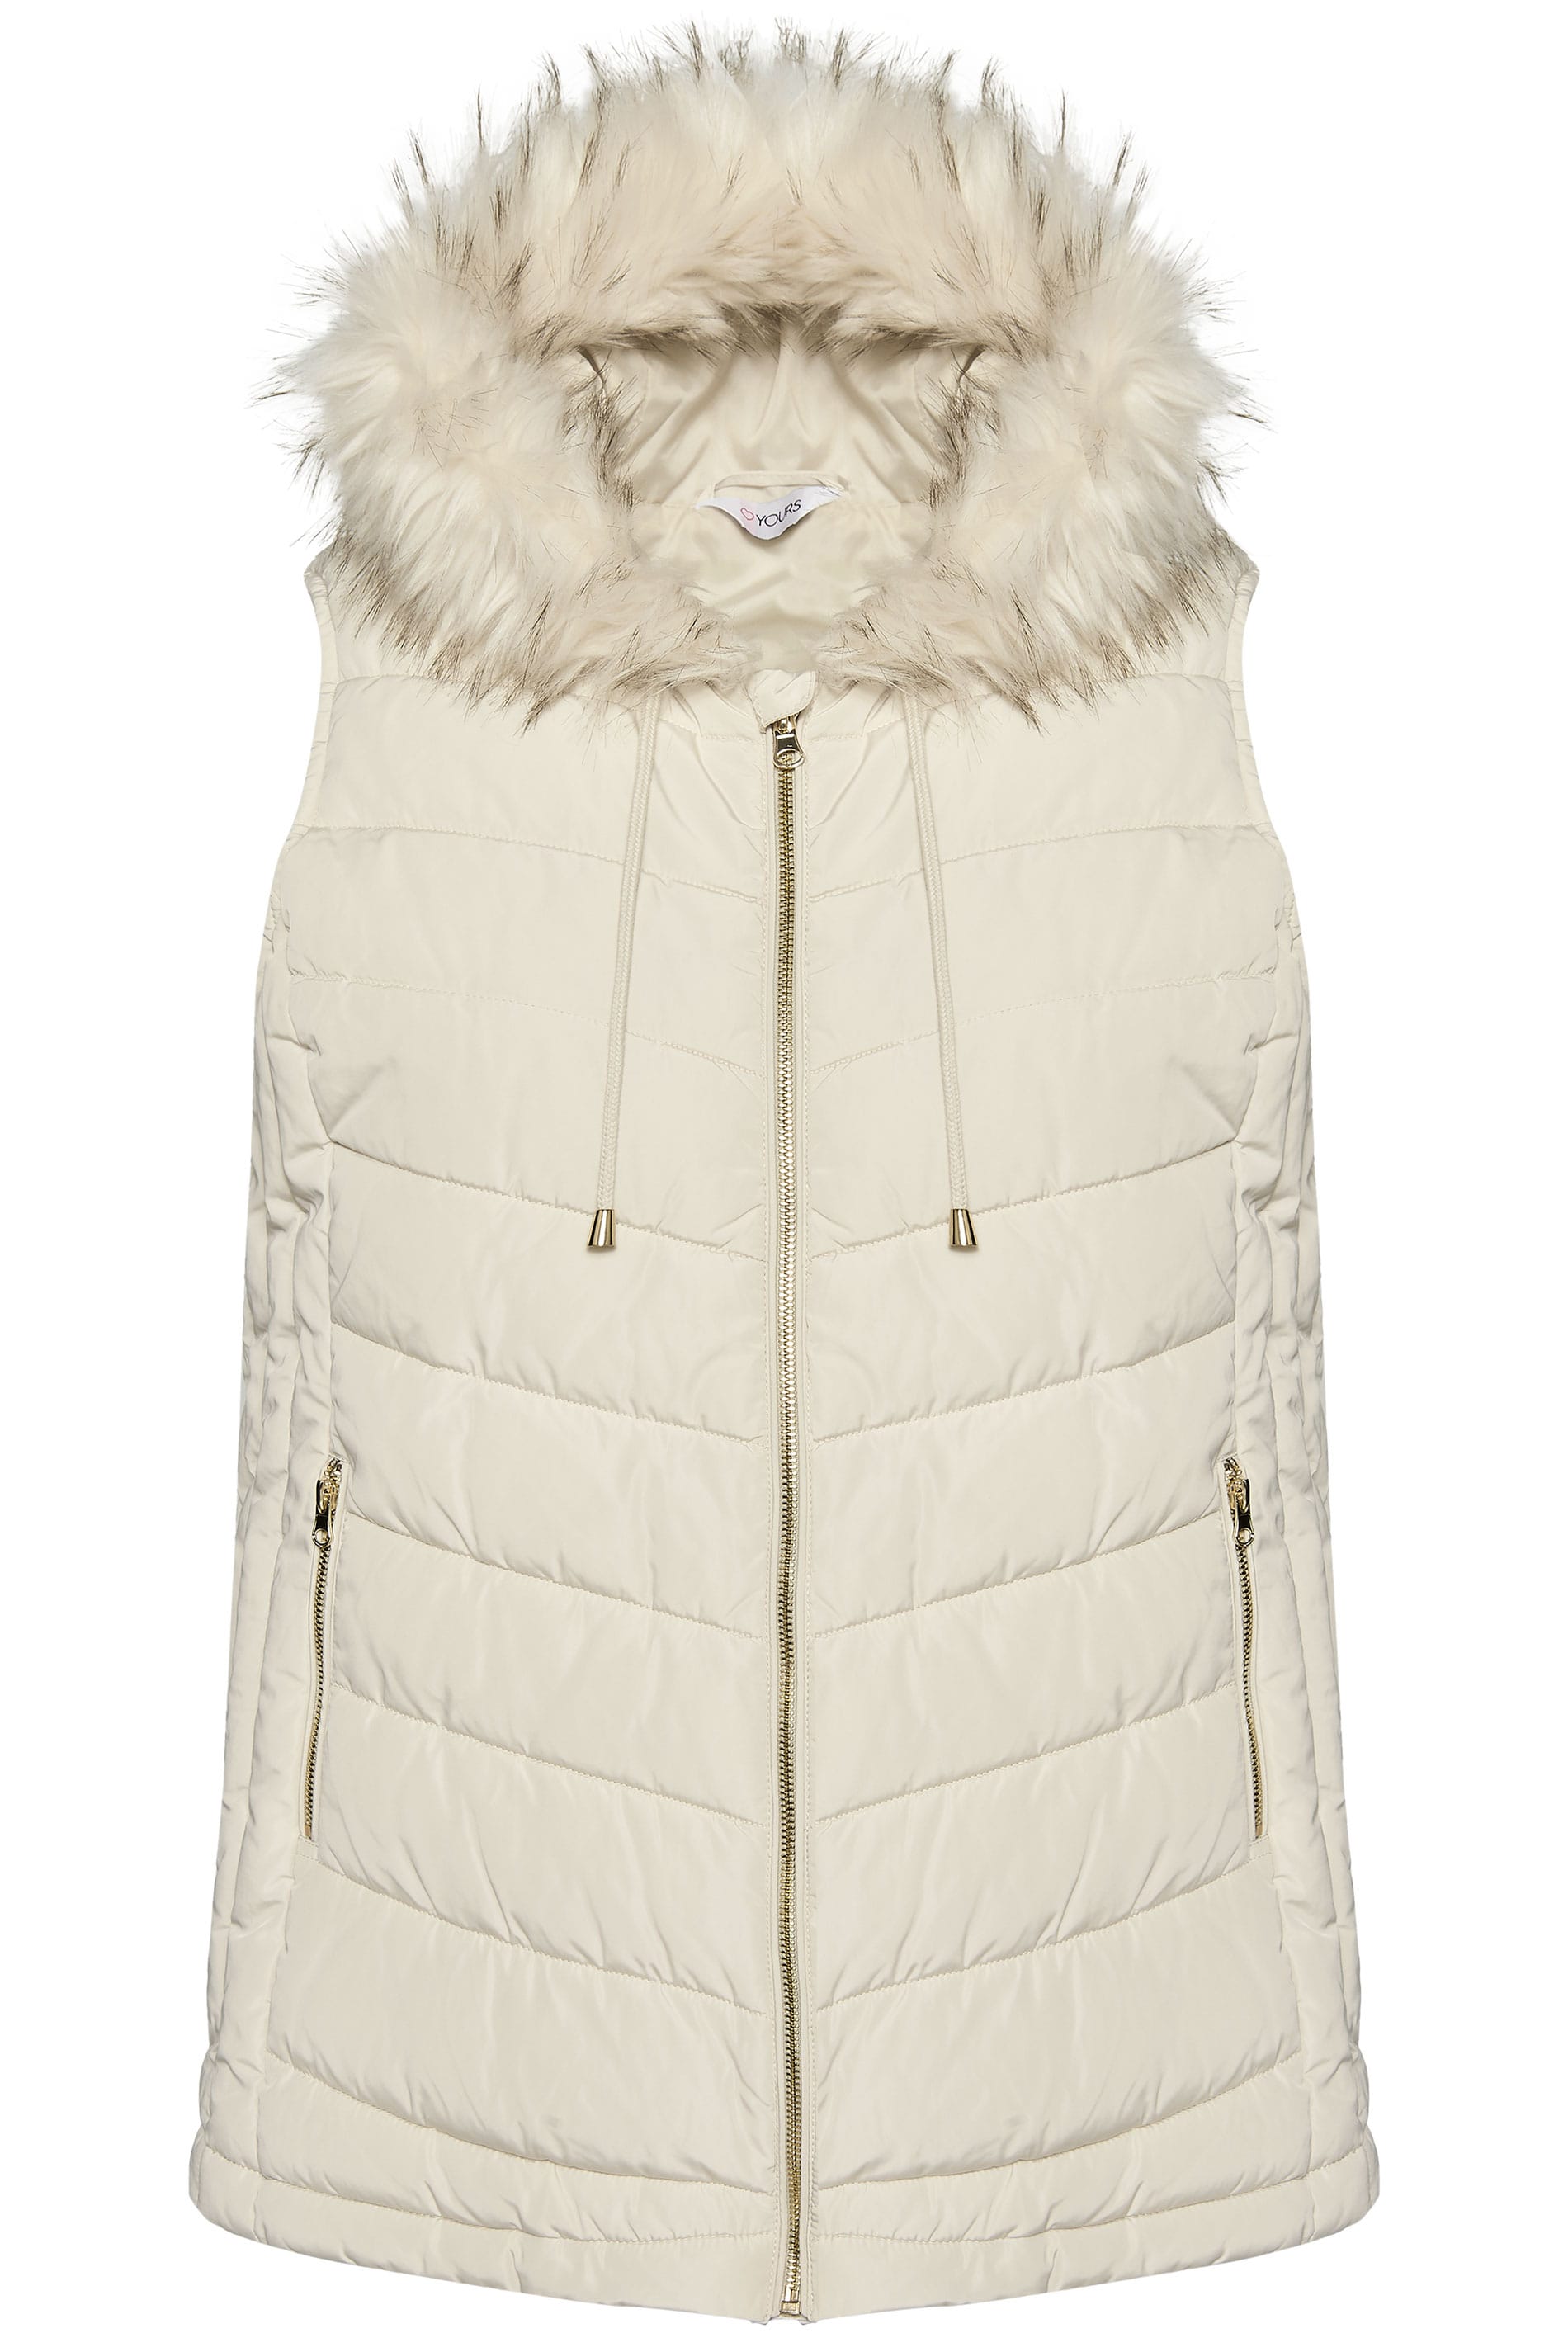 Cream Panelled Gilet With Faux Fur Trim Hood | Sizes 16-36 | Yours Clothing